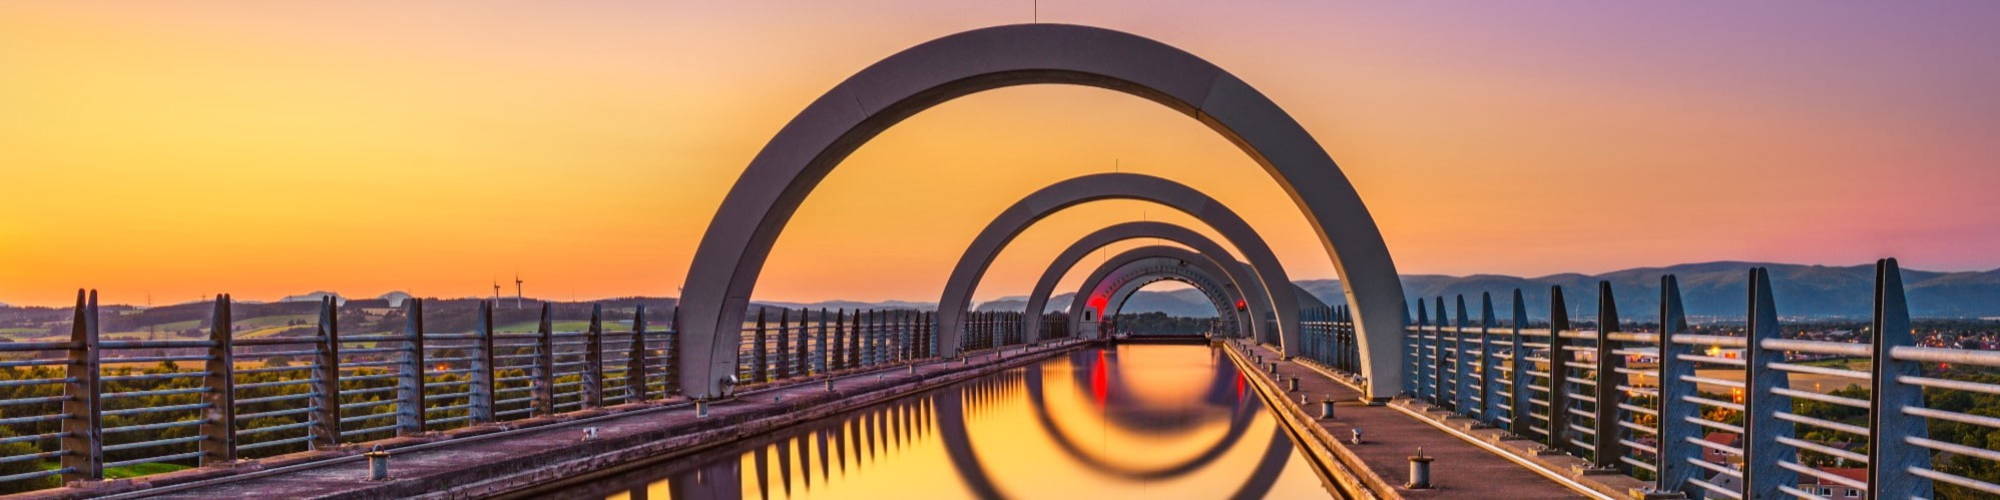 The Falkirk Wheel, a marvel of engineering, reflecting in water to form a perfect circle—a visual metaphor for connecting candidates with clients in our Commercial division, offering Admin, Payroll, HR, Manager, and Director roles.